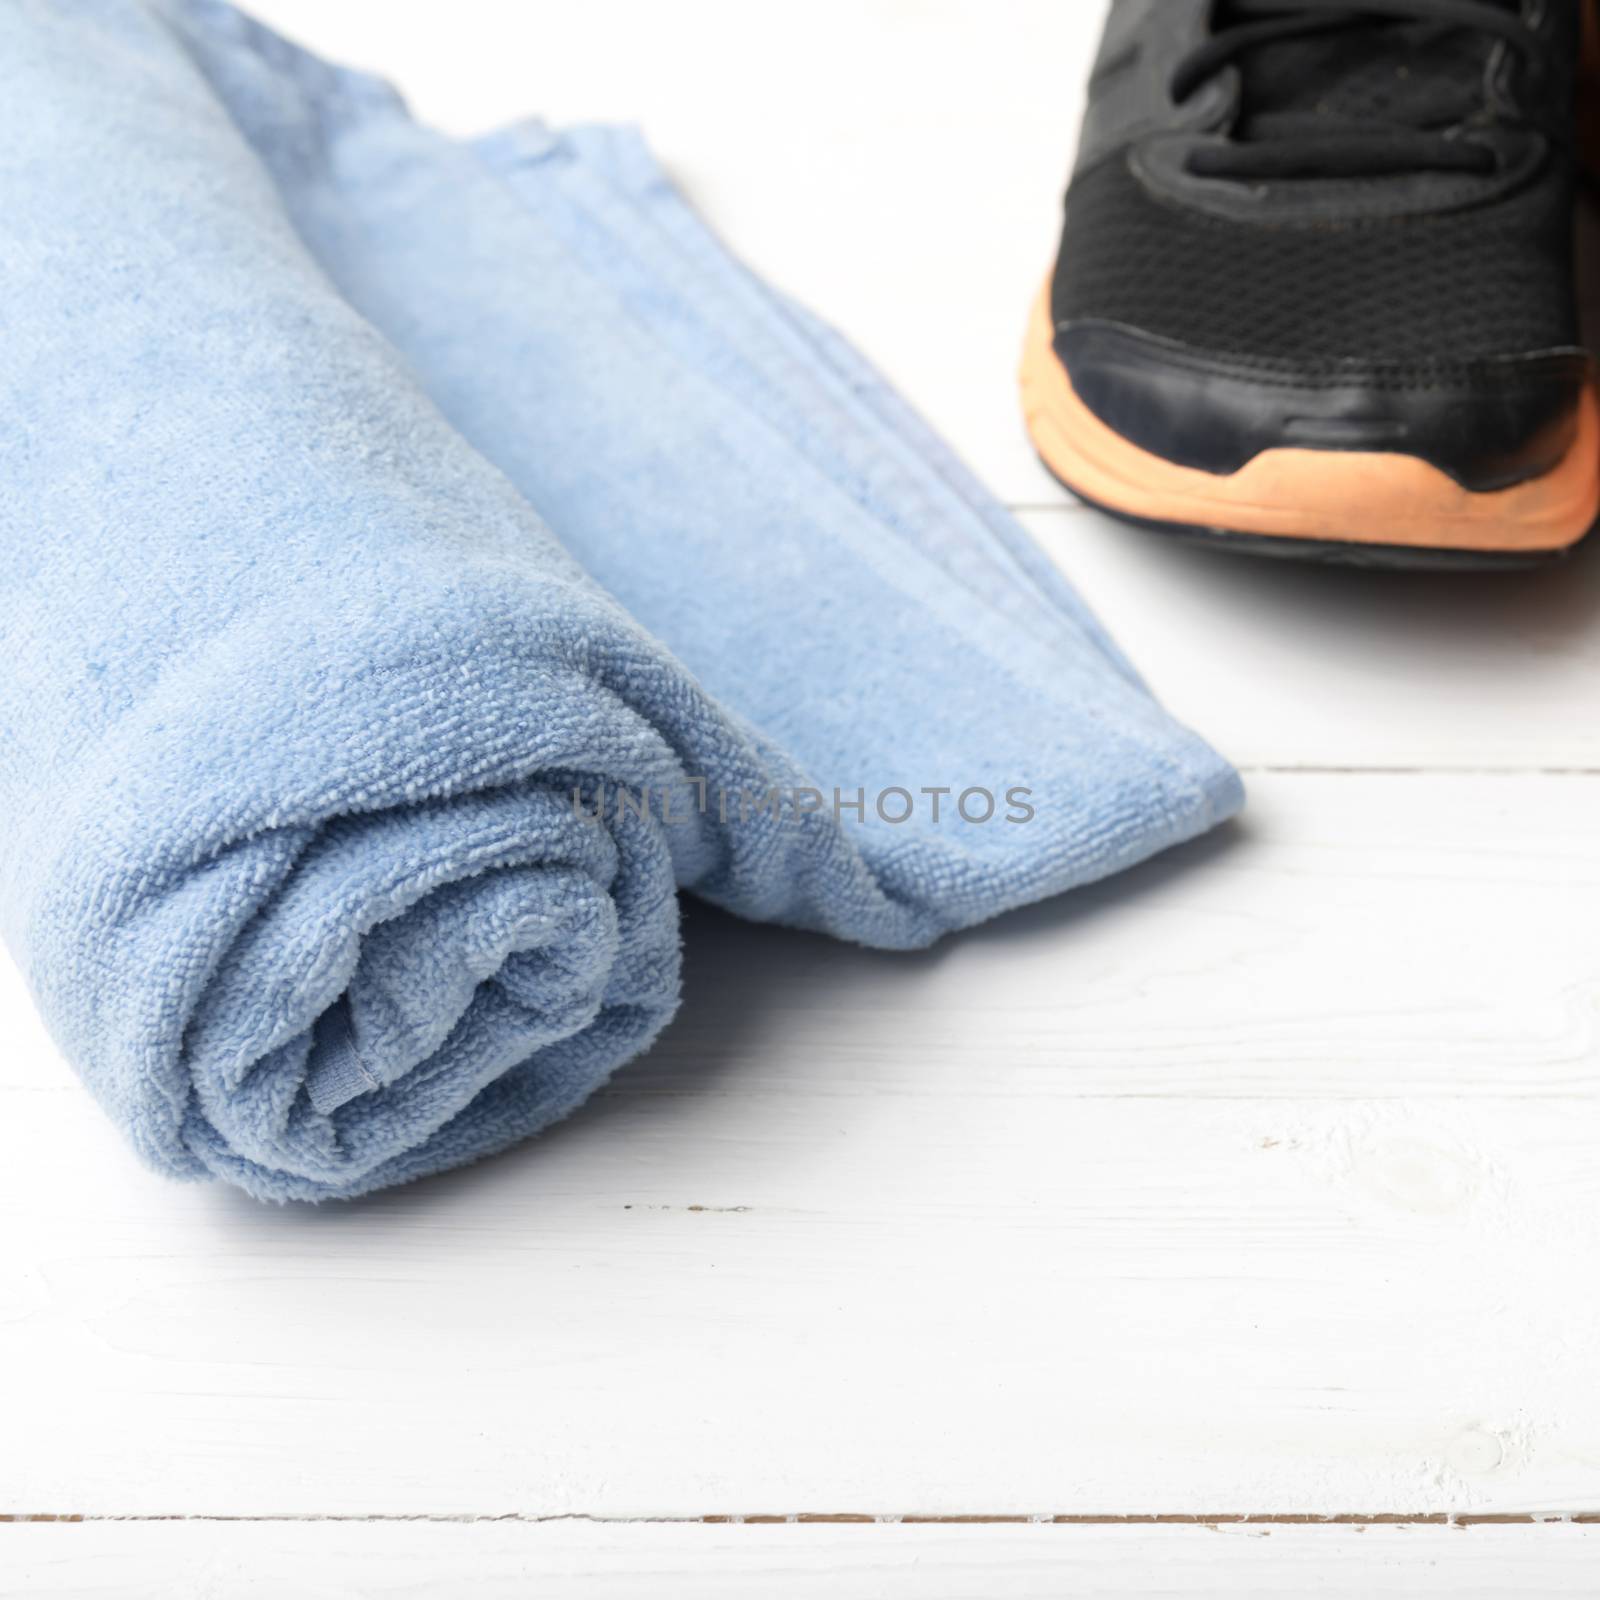 running shoes and towel by ammza12